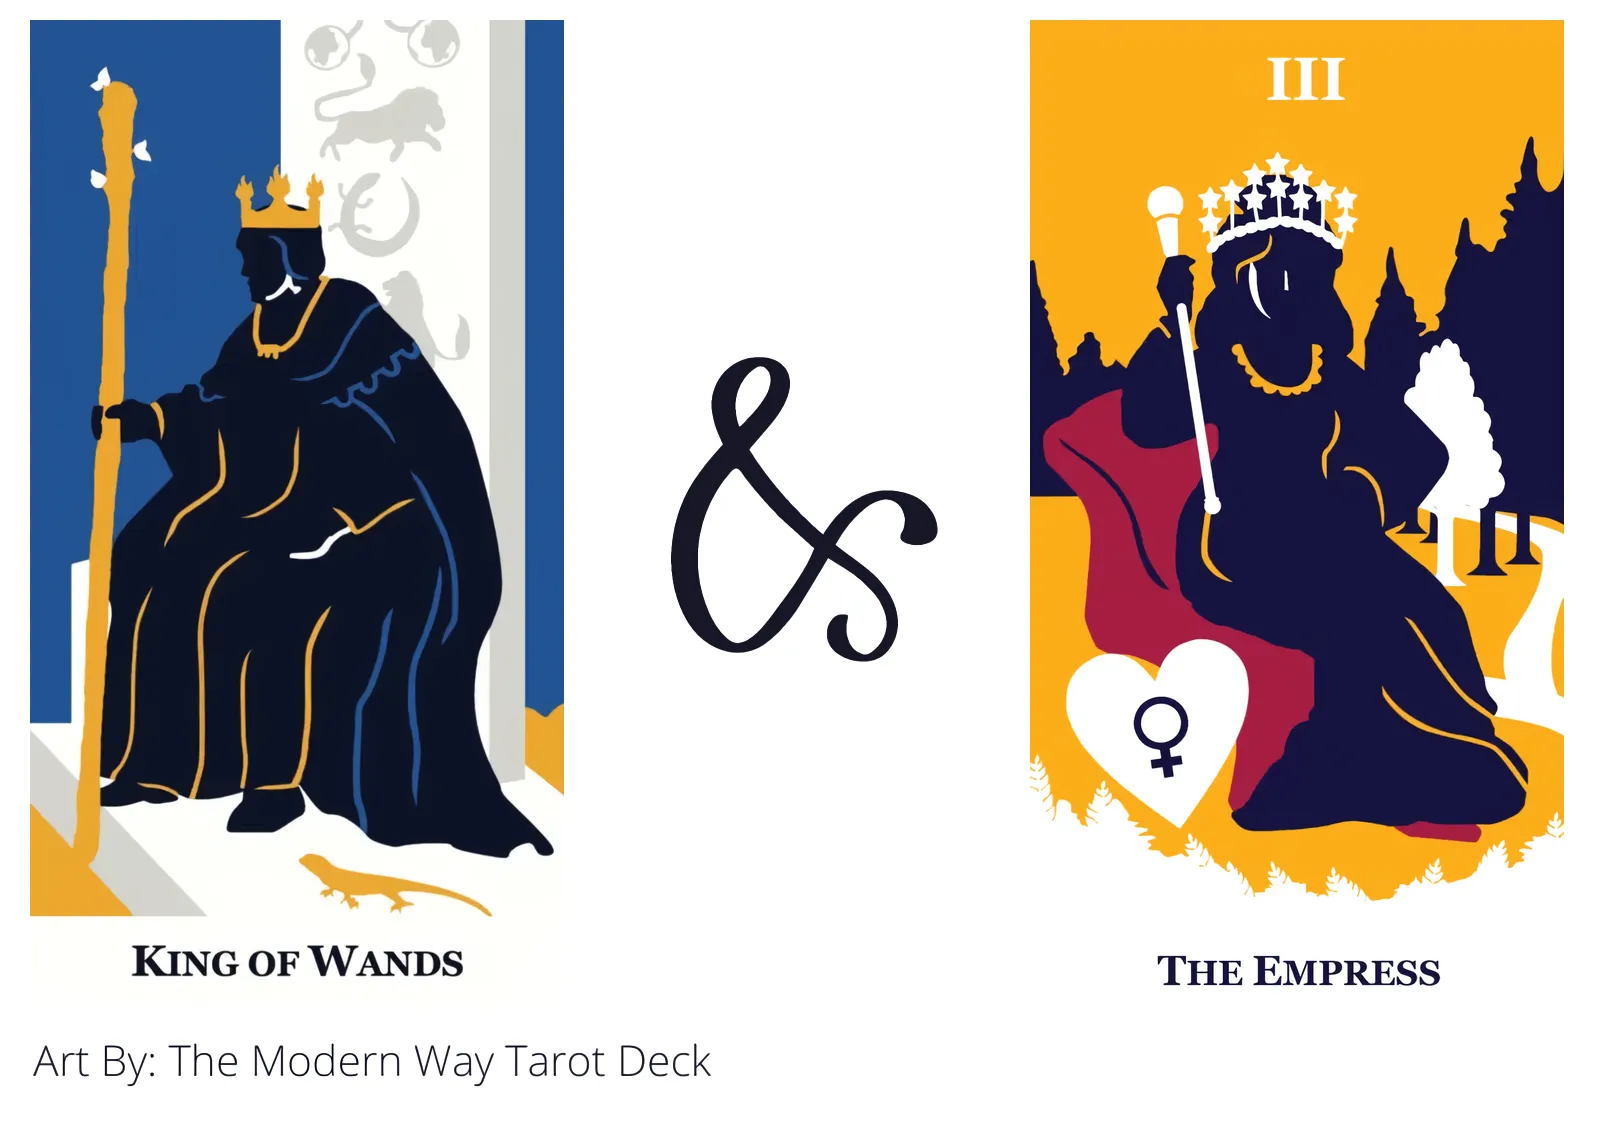 king of wands and the empress tarot cards together